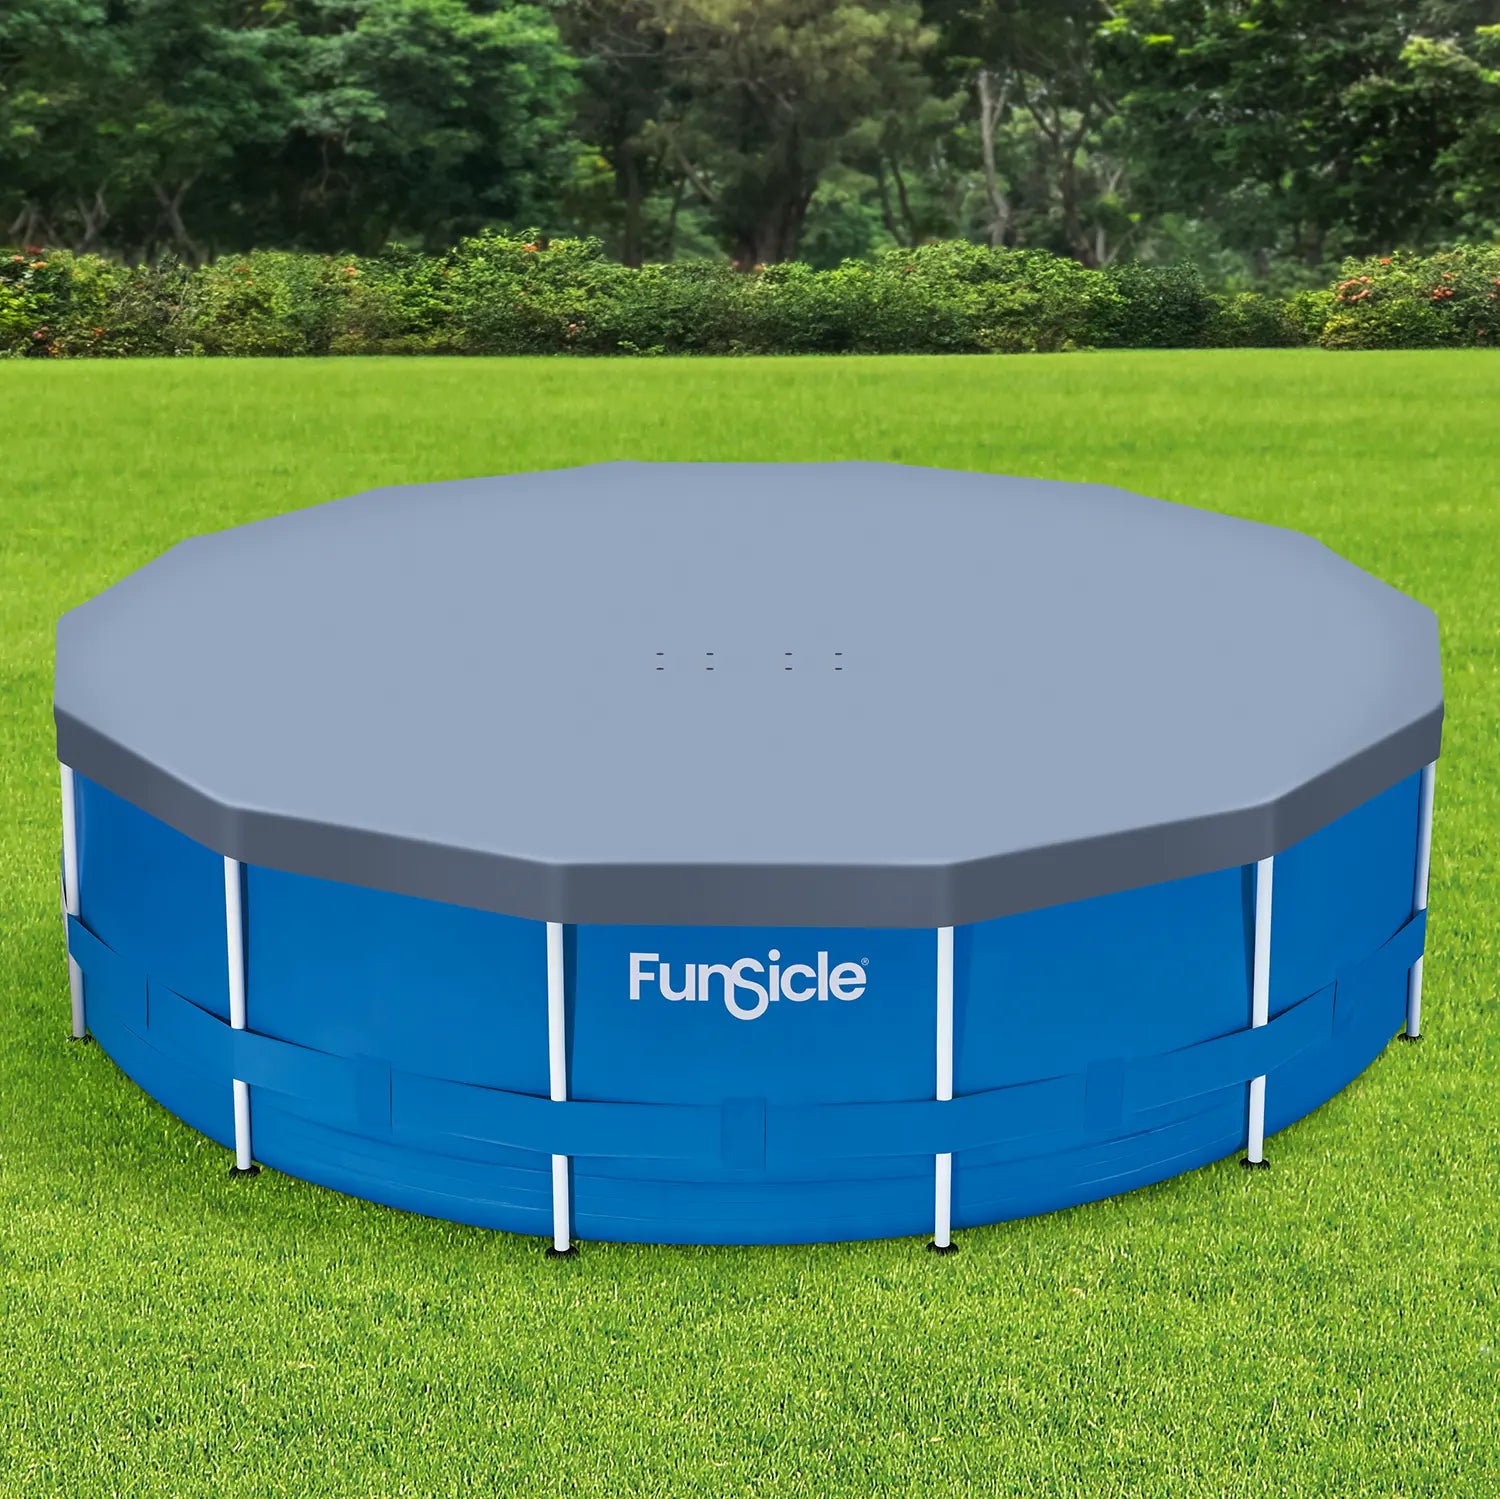 Funsicle 14ft Frame Pool Cover on a grass background